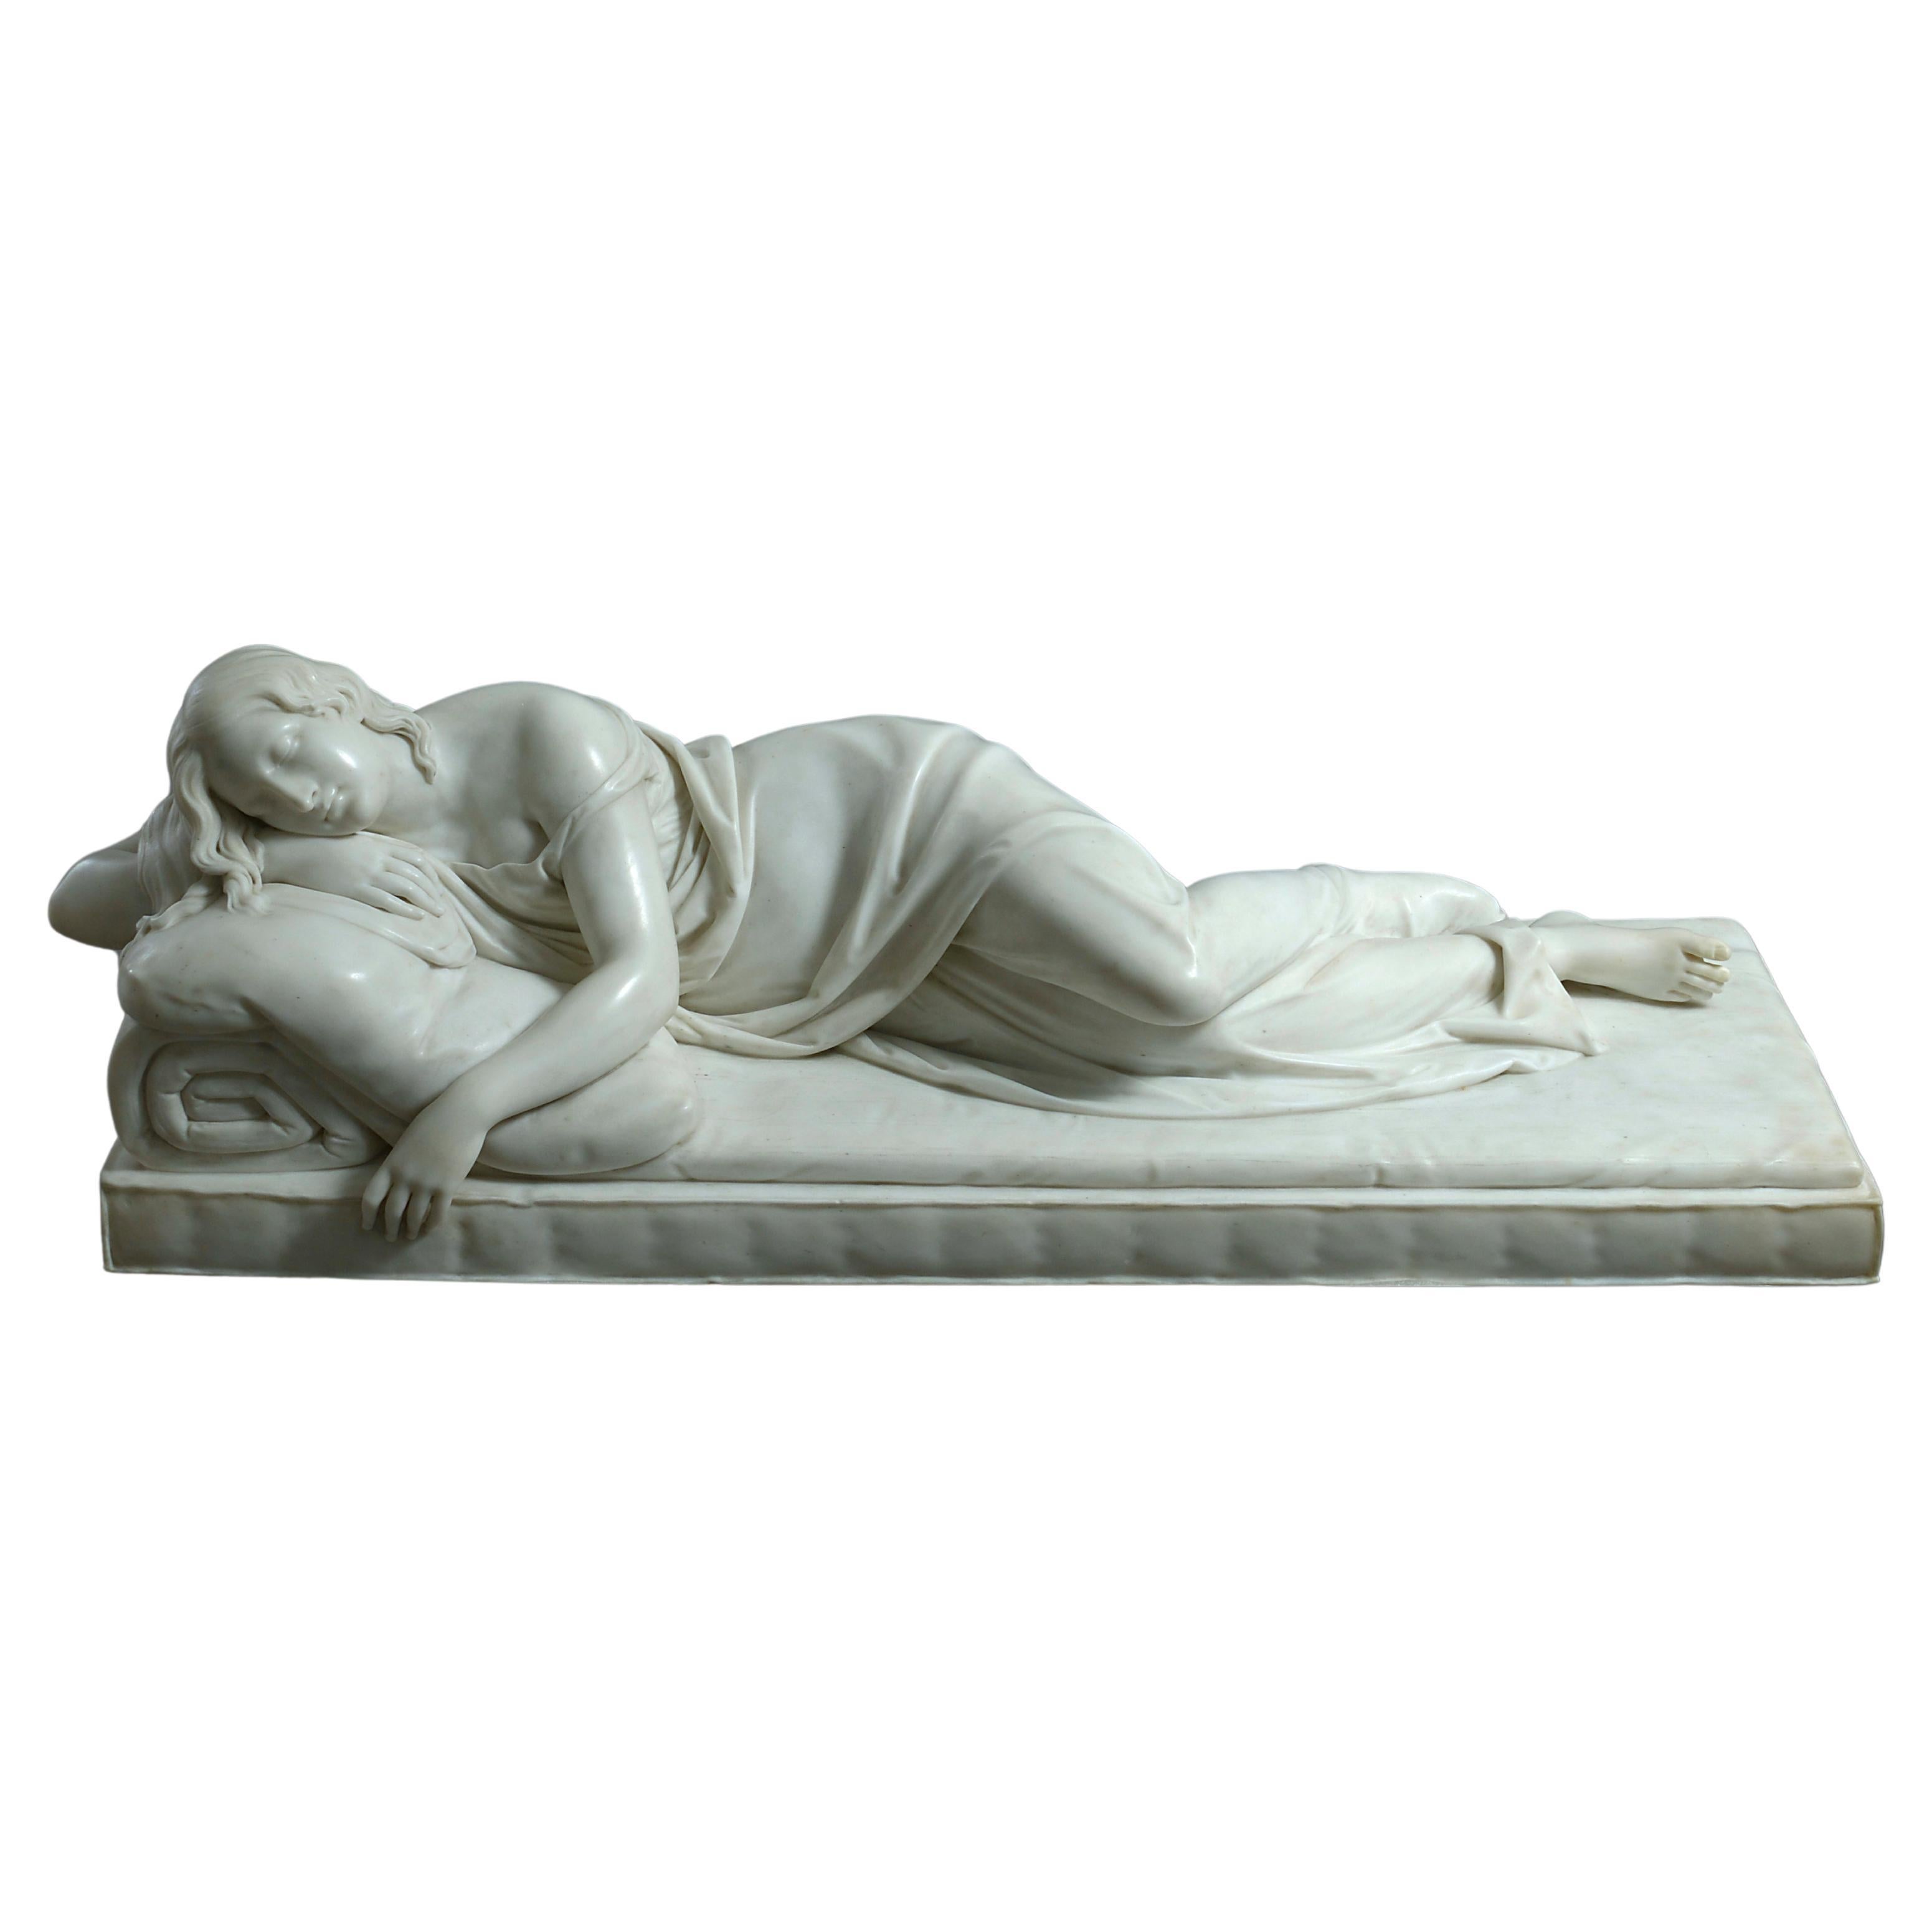 Edward Hodges Baily (1788-1867) Sleeping Nymph For Sale